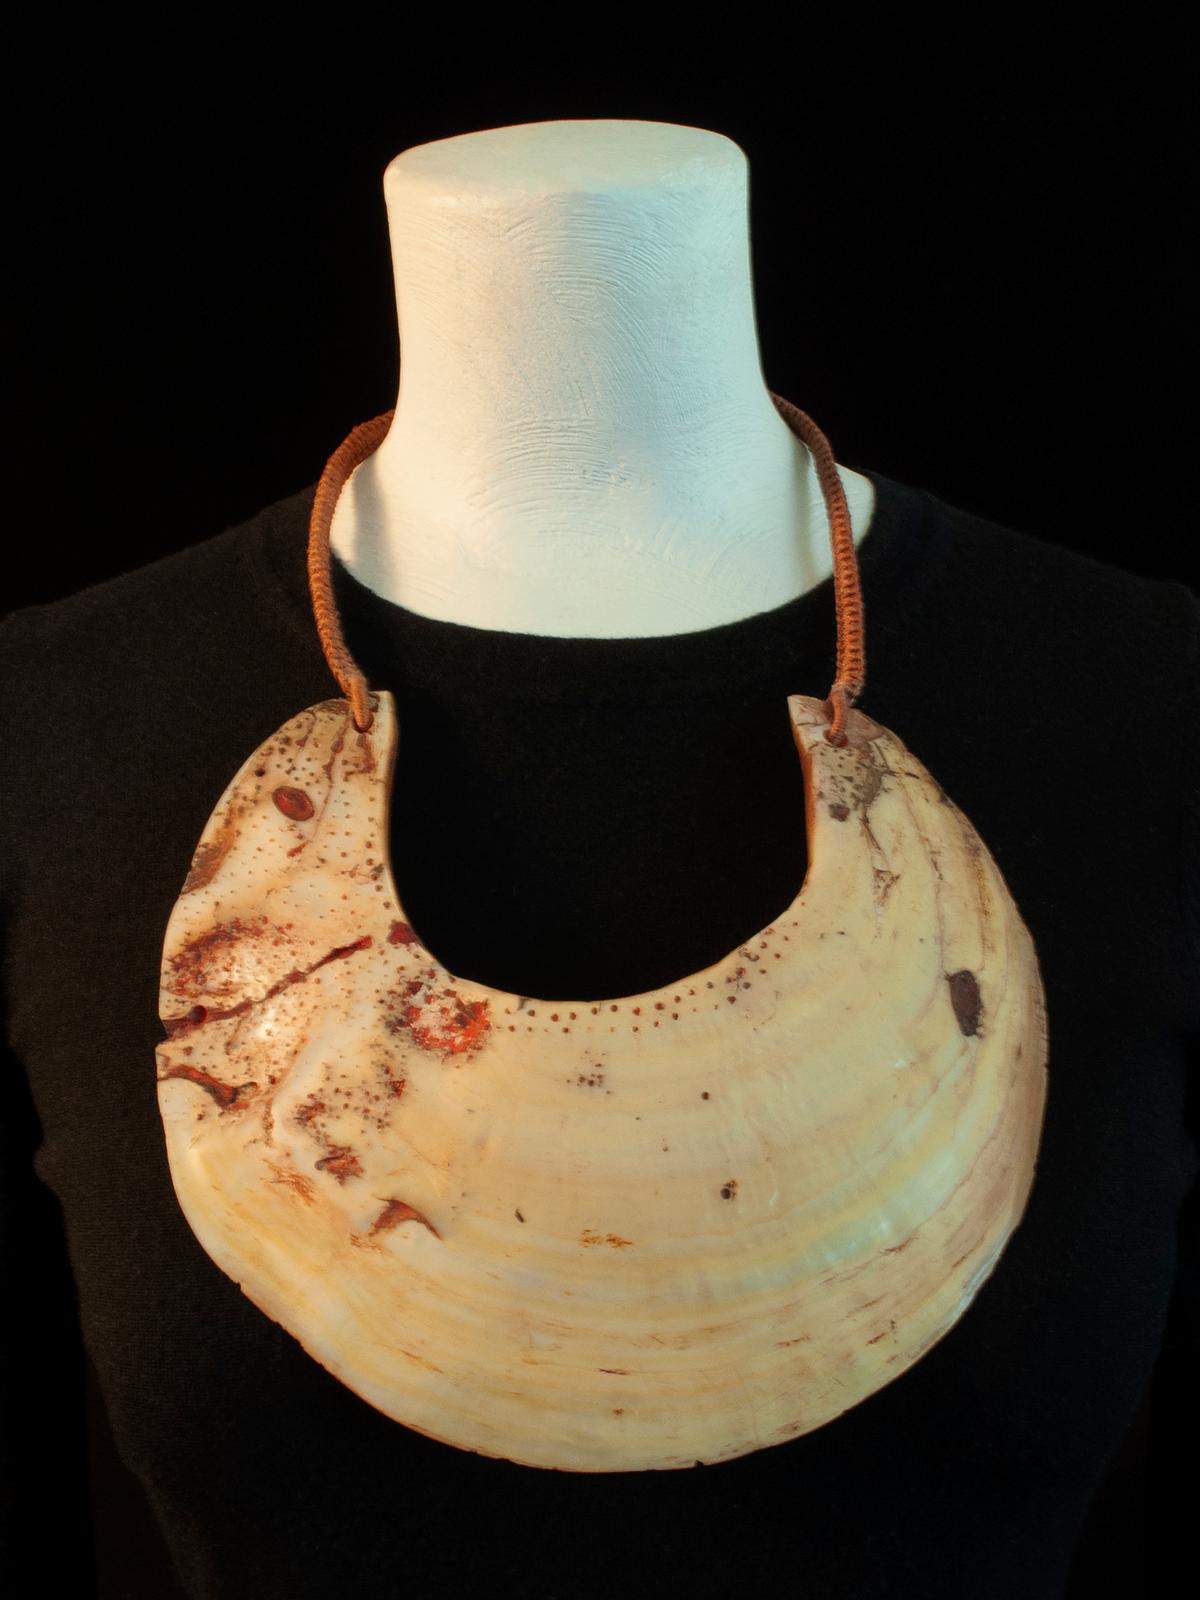 20th Century Tribal Kina Shell Pectoral Necklace by unknown jeweler

Kina shells were traditionally worn in the western highlands of Papua New Guinea as pectorals, either with a fiber strap or on a plaque known as a moka kina. This shell has been